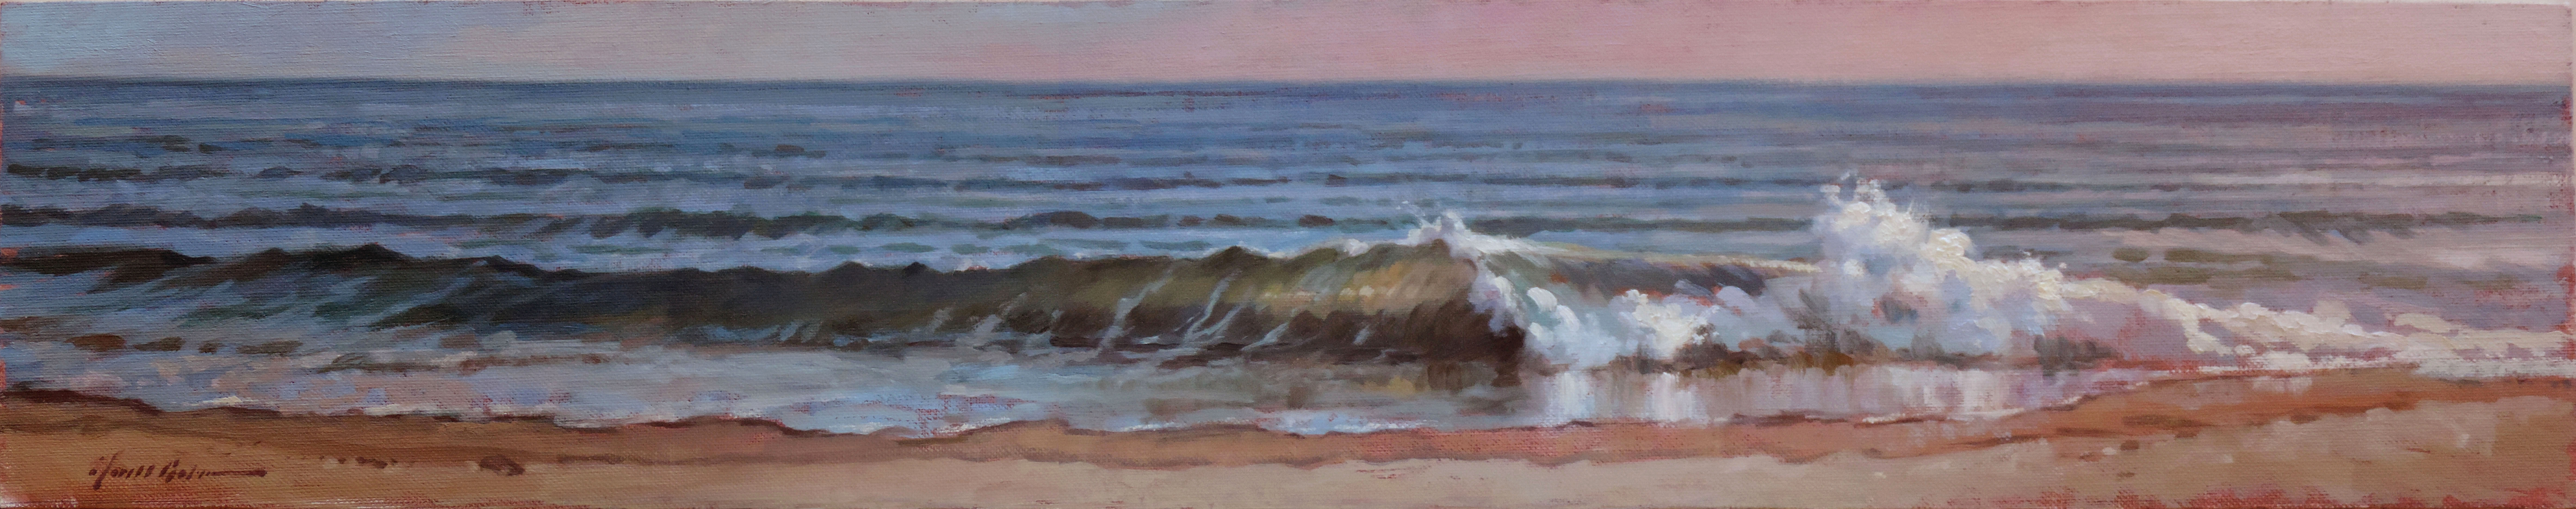 Oil painting of an ocean wave at the beach